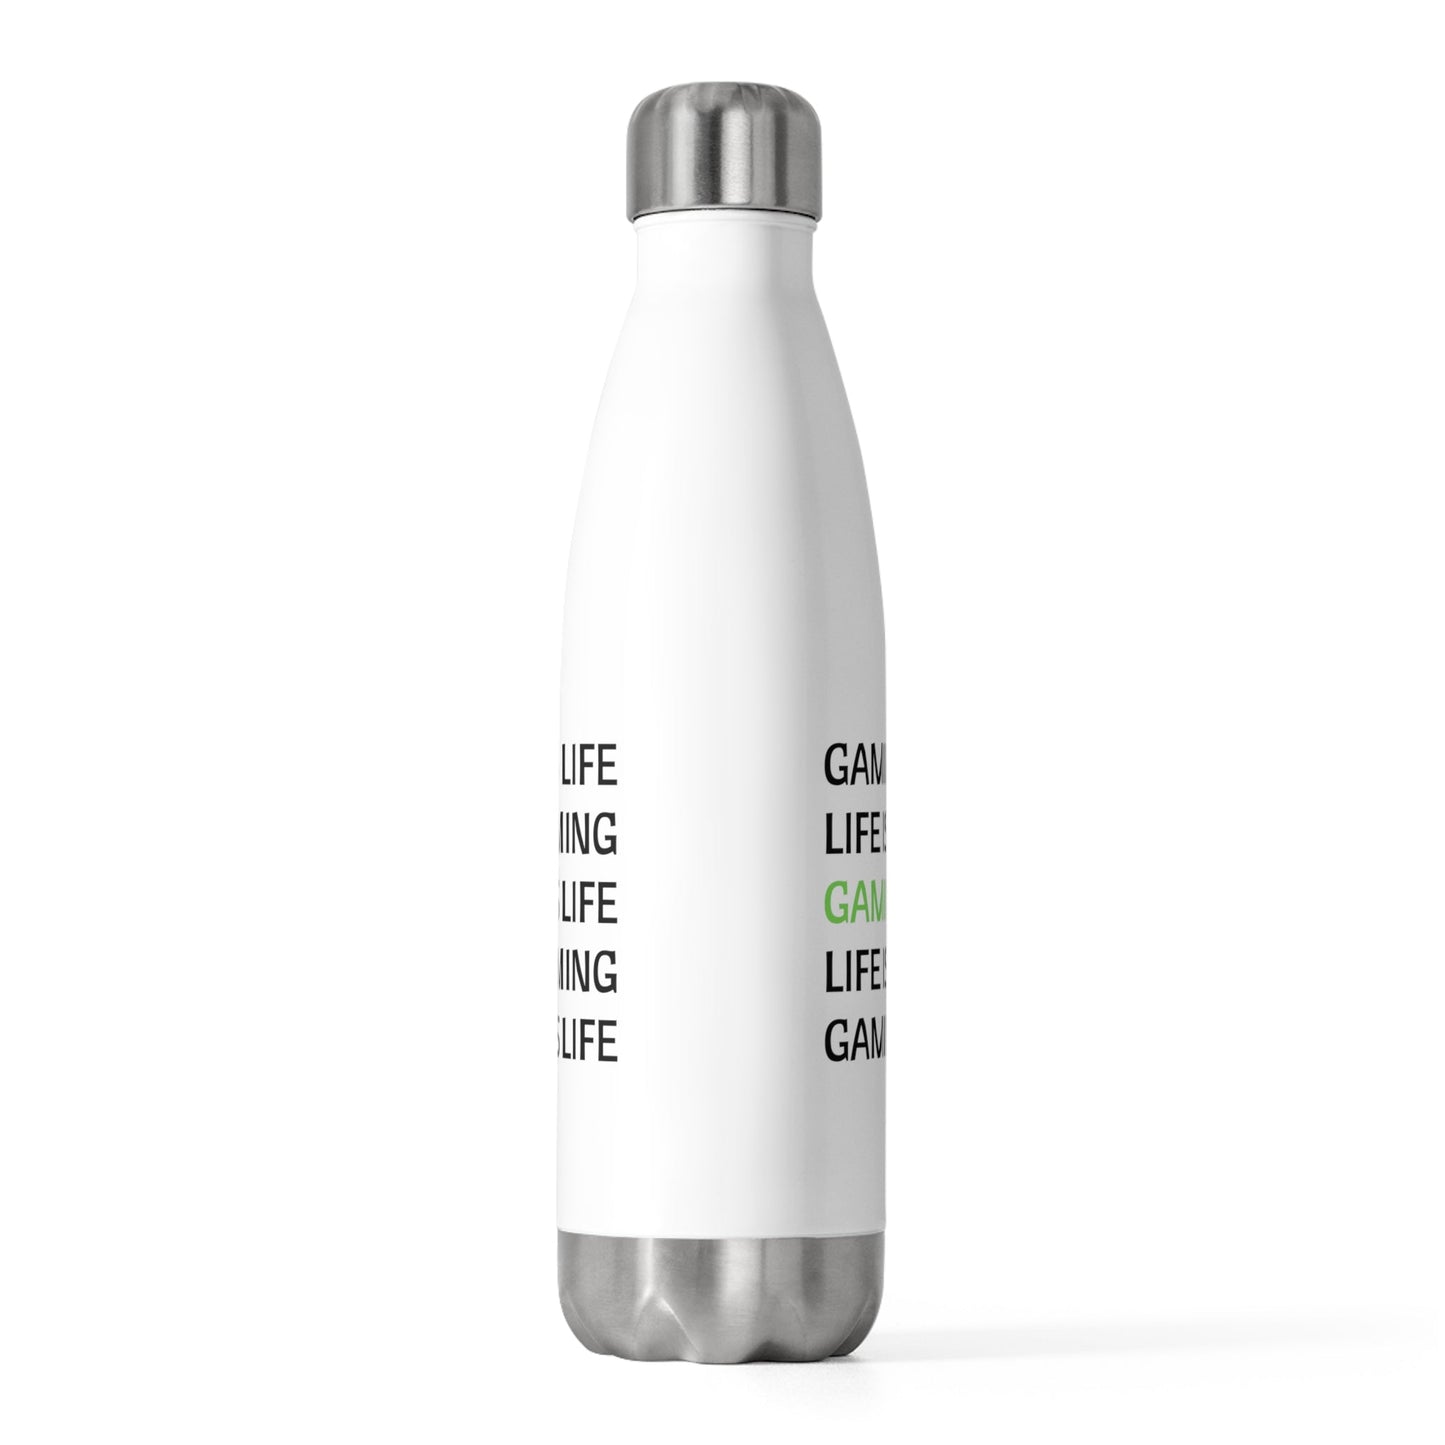 Gaming is Life | 20oz Insulated Bottle